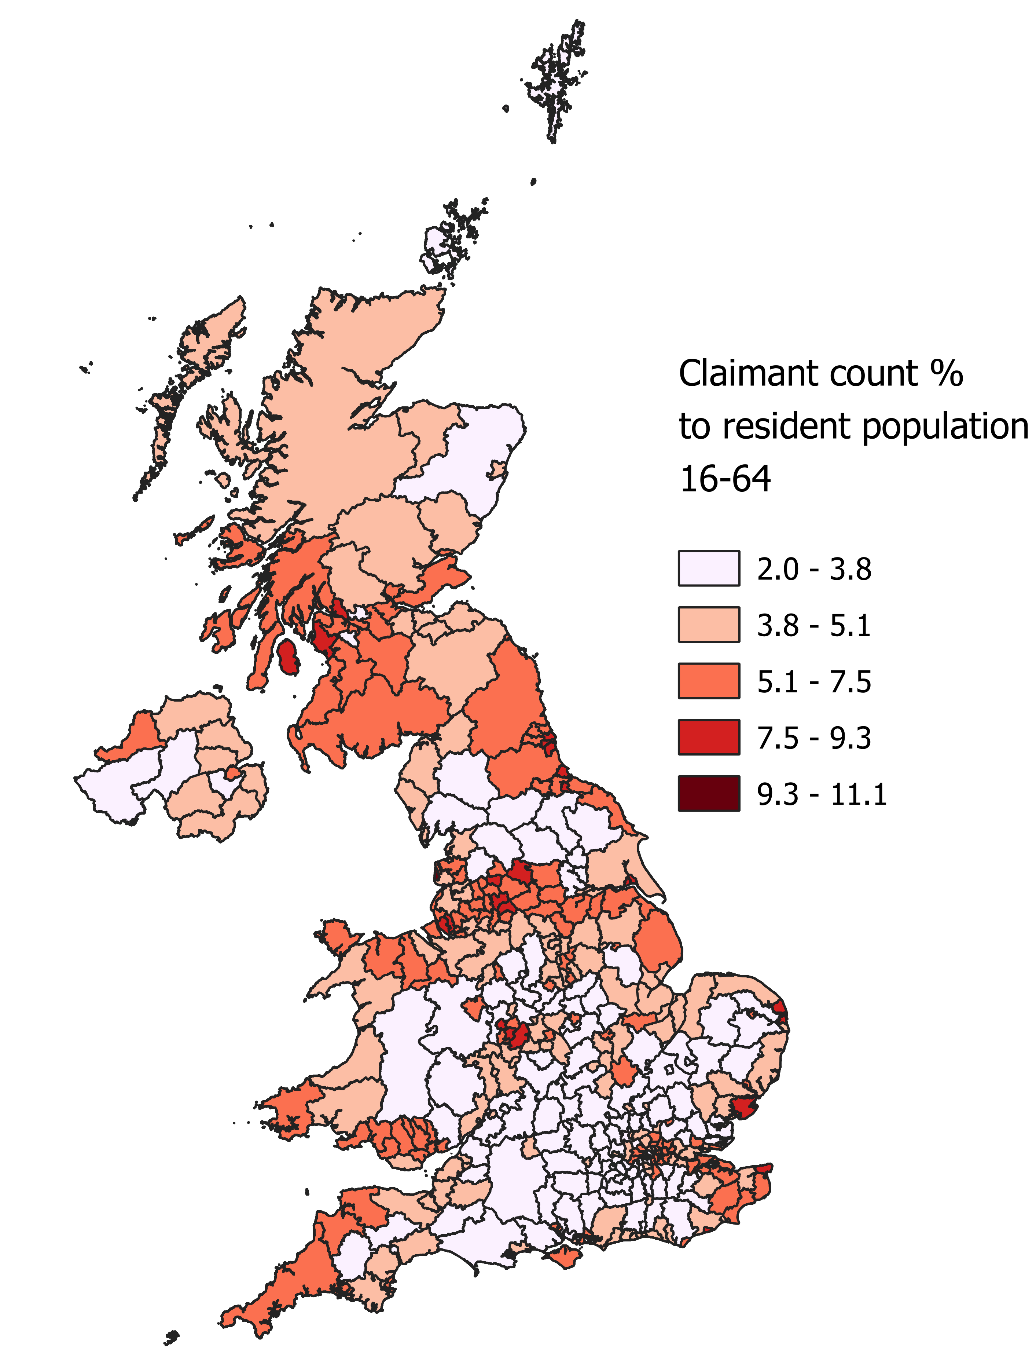 Map showing claimant count rates as a share of resident population 16-64 in UK local authority districts